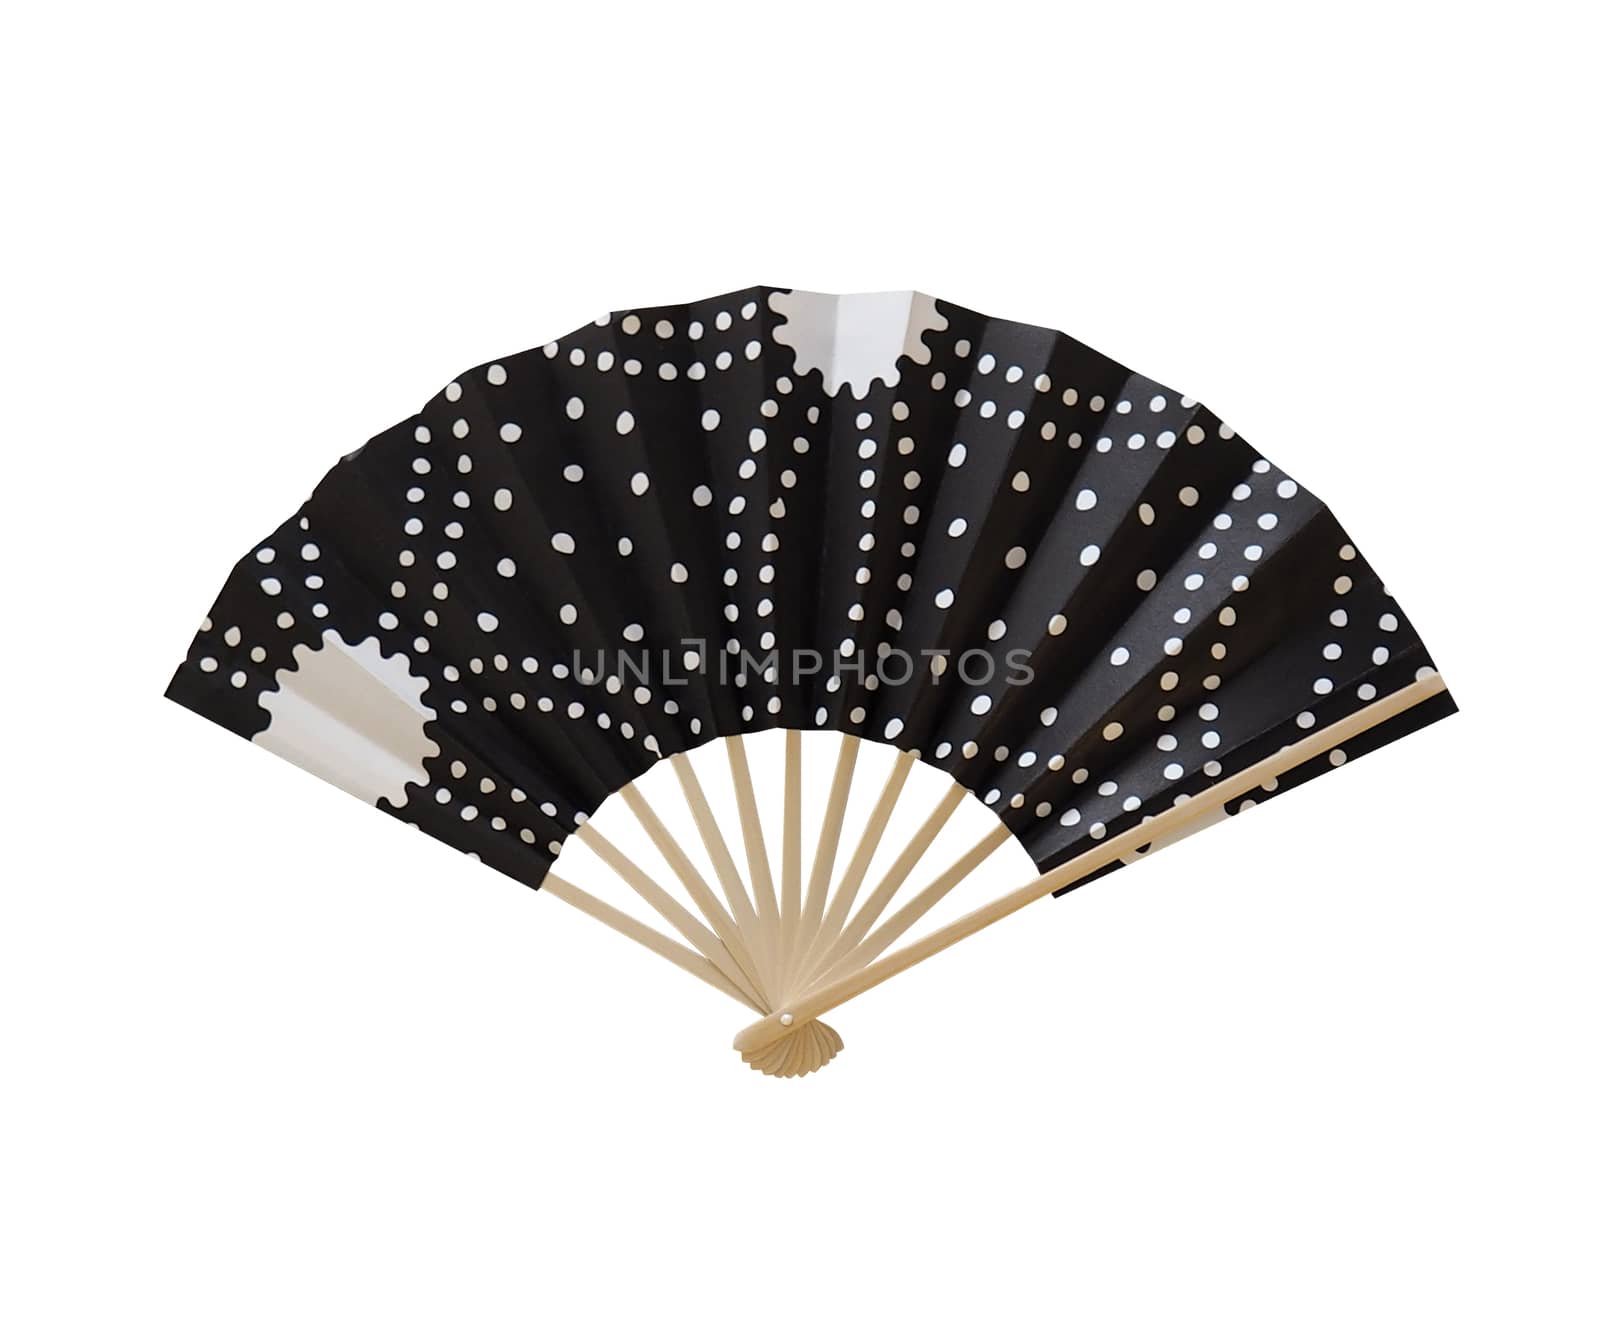 Japanese paper fan and black color. by gnepphoto